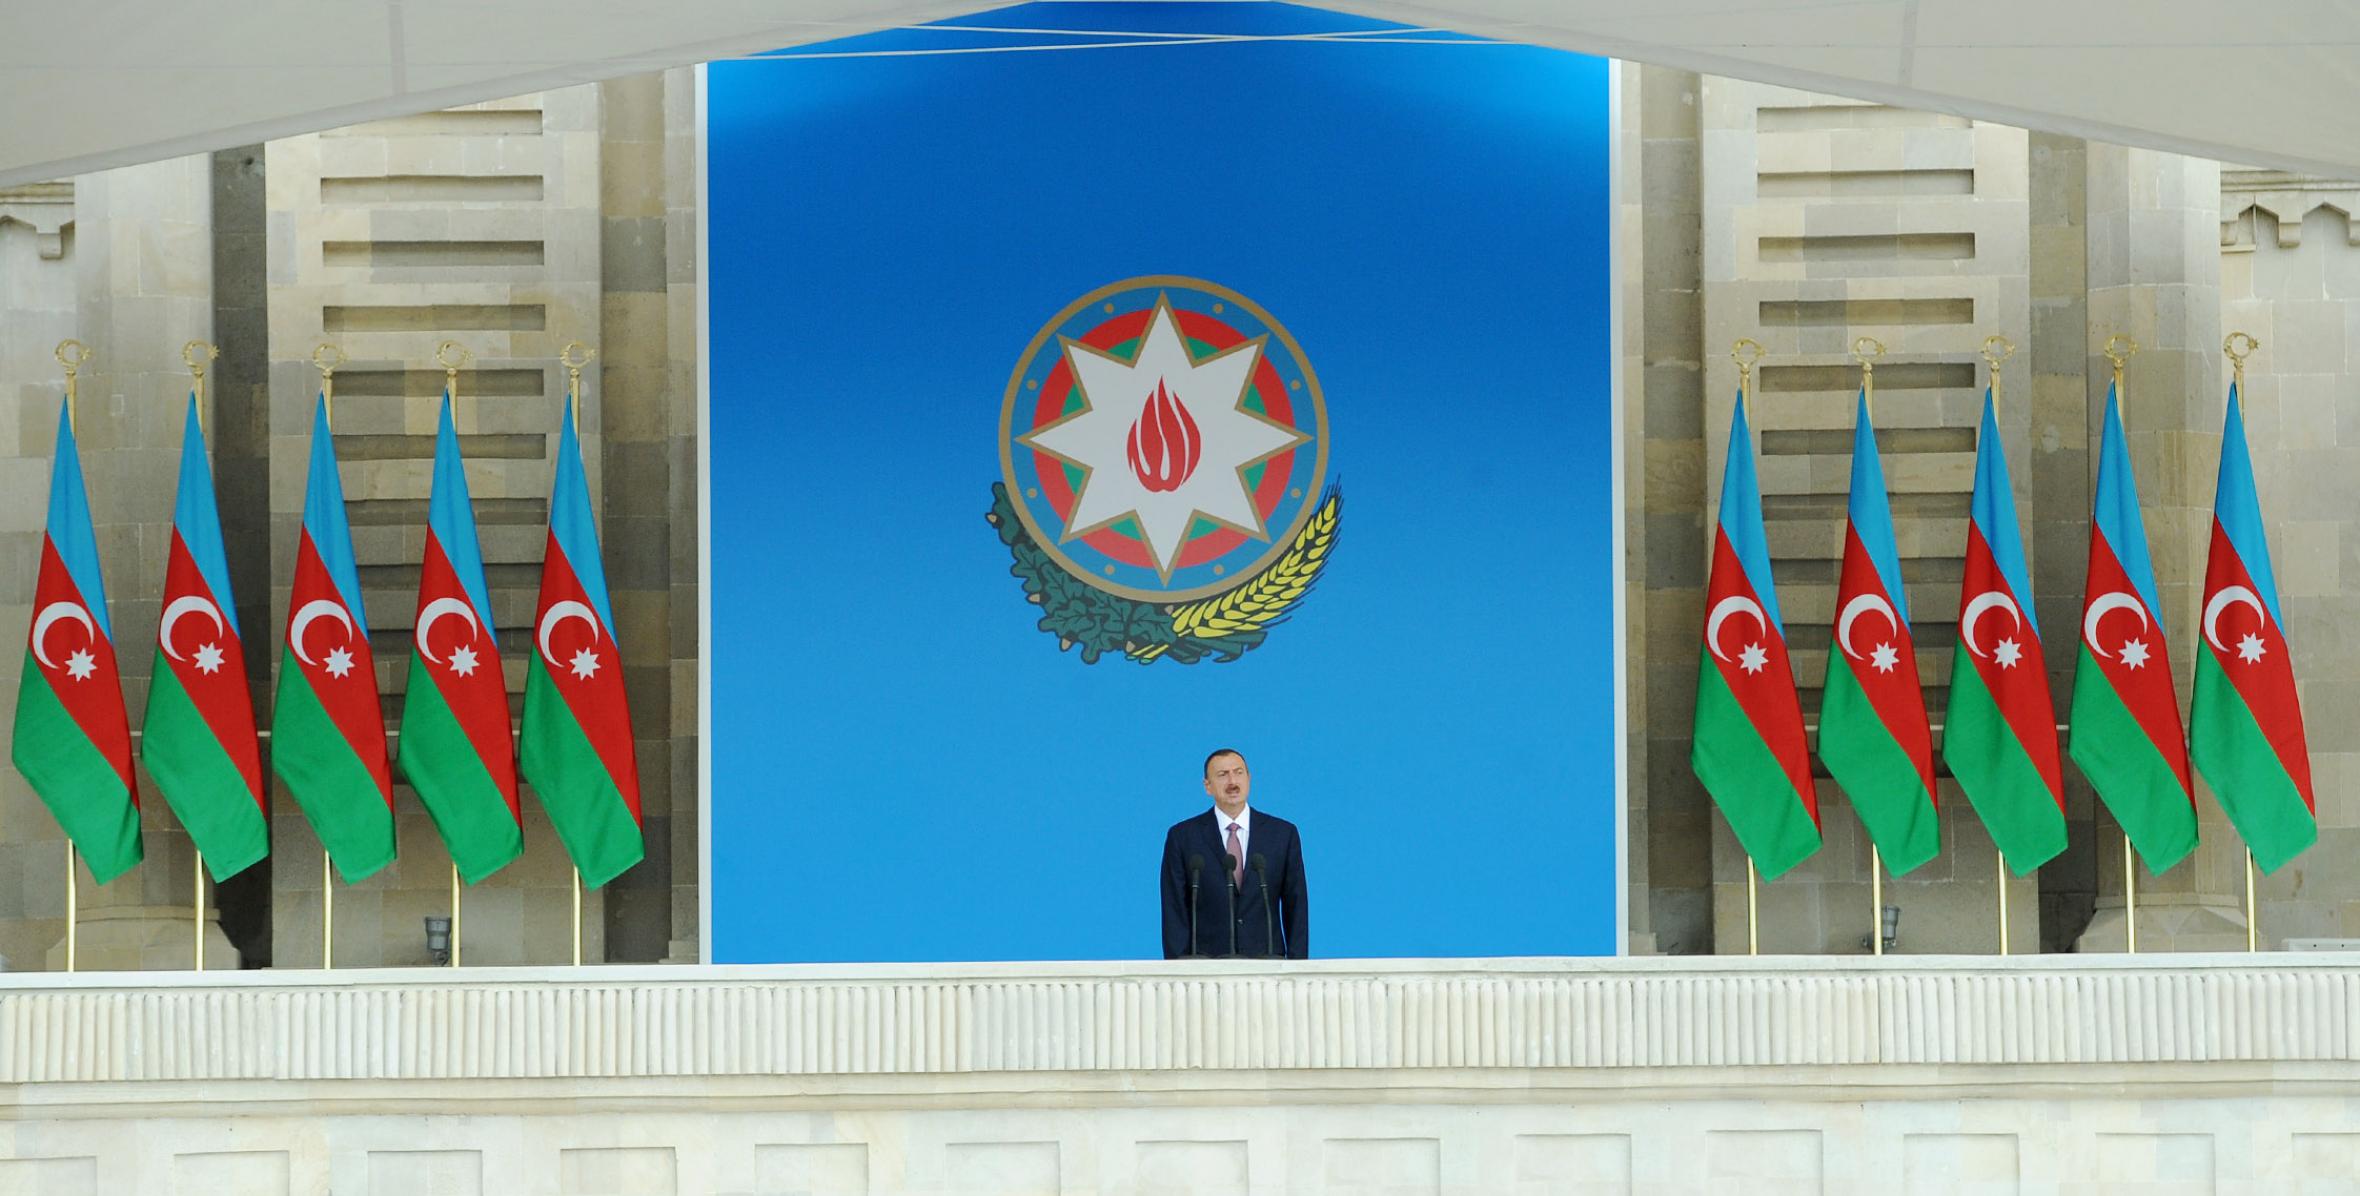 Ilham Aliyev attended the official military parade on the occasion of the 95th anniversary of the Armed Forces